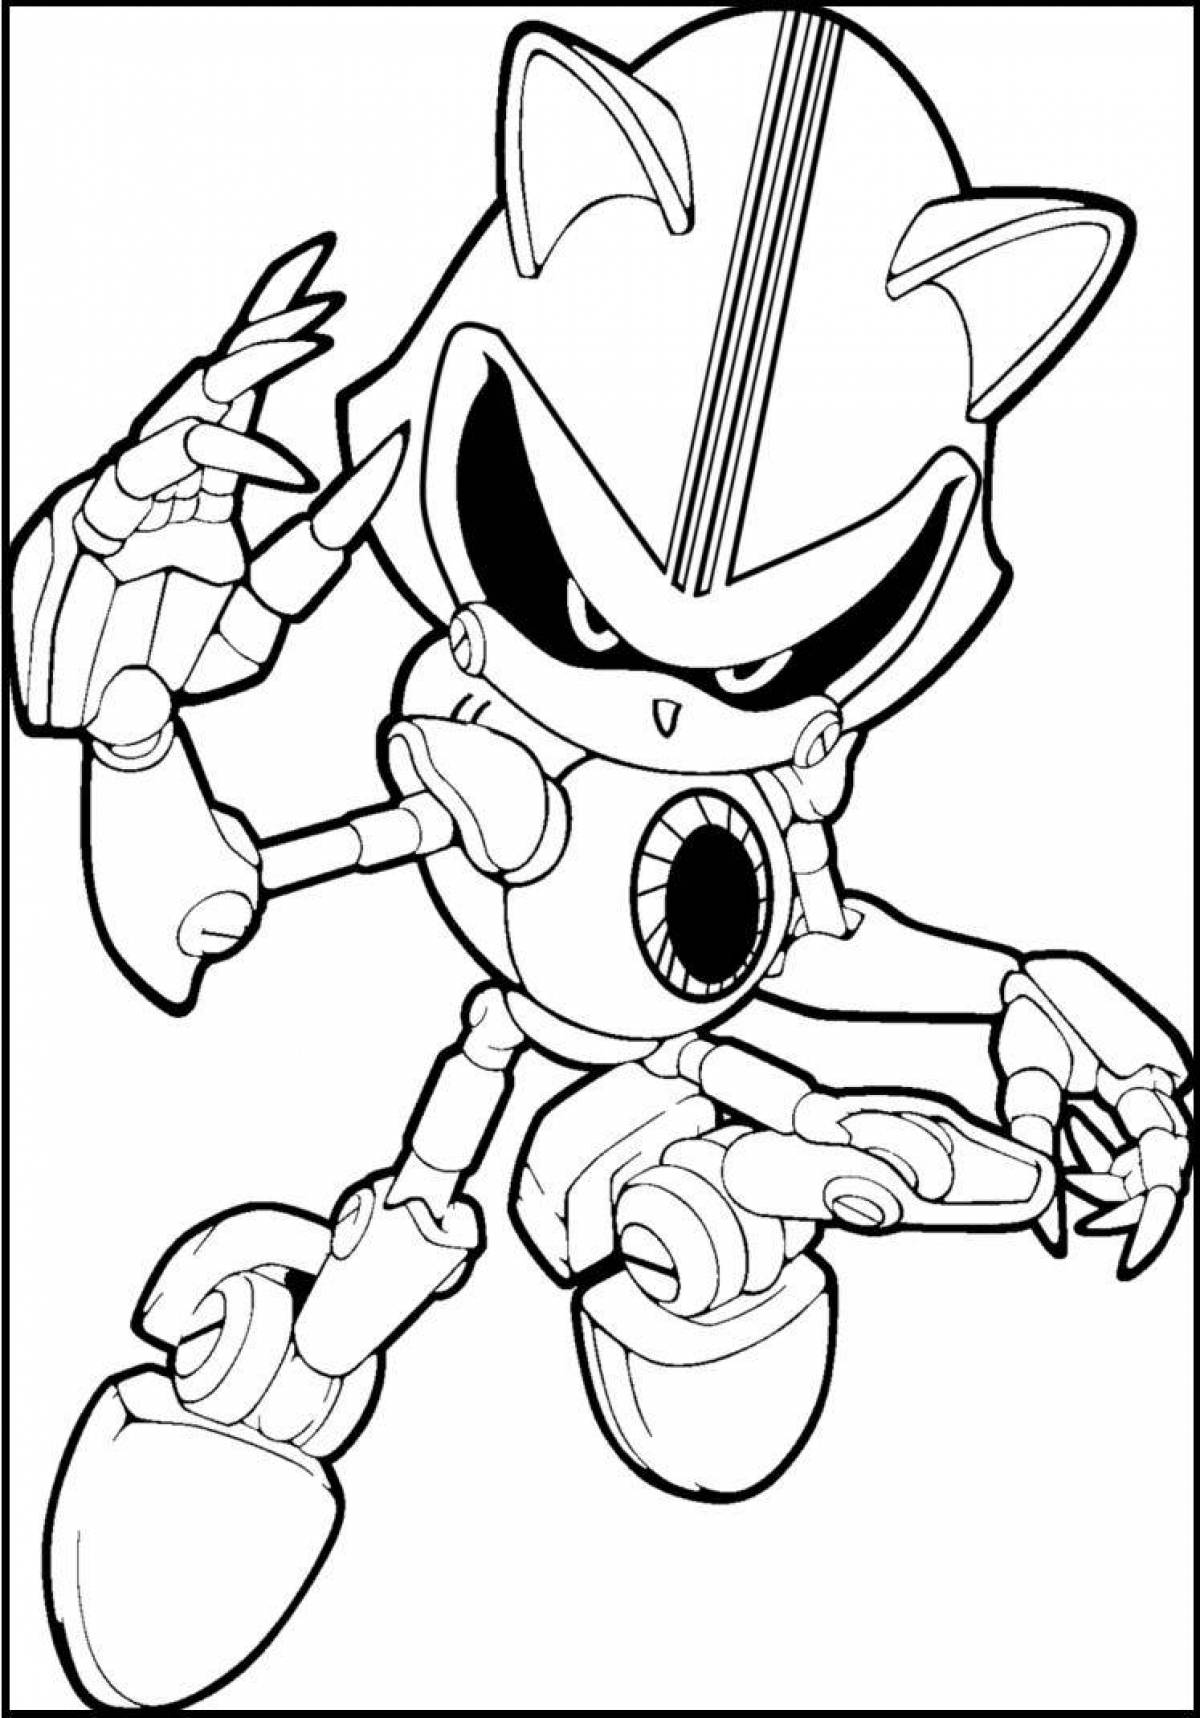 Sonic robot mystical coloring book